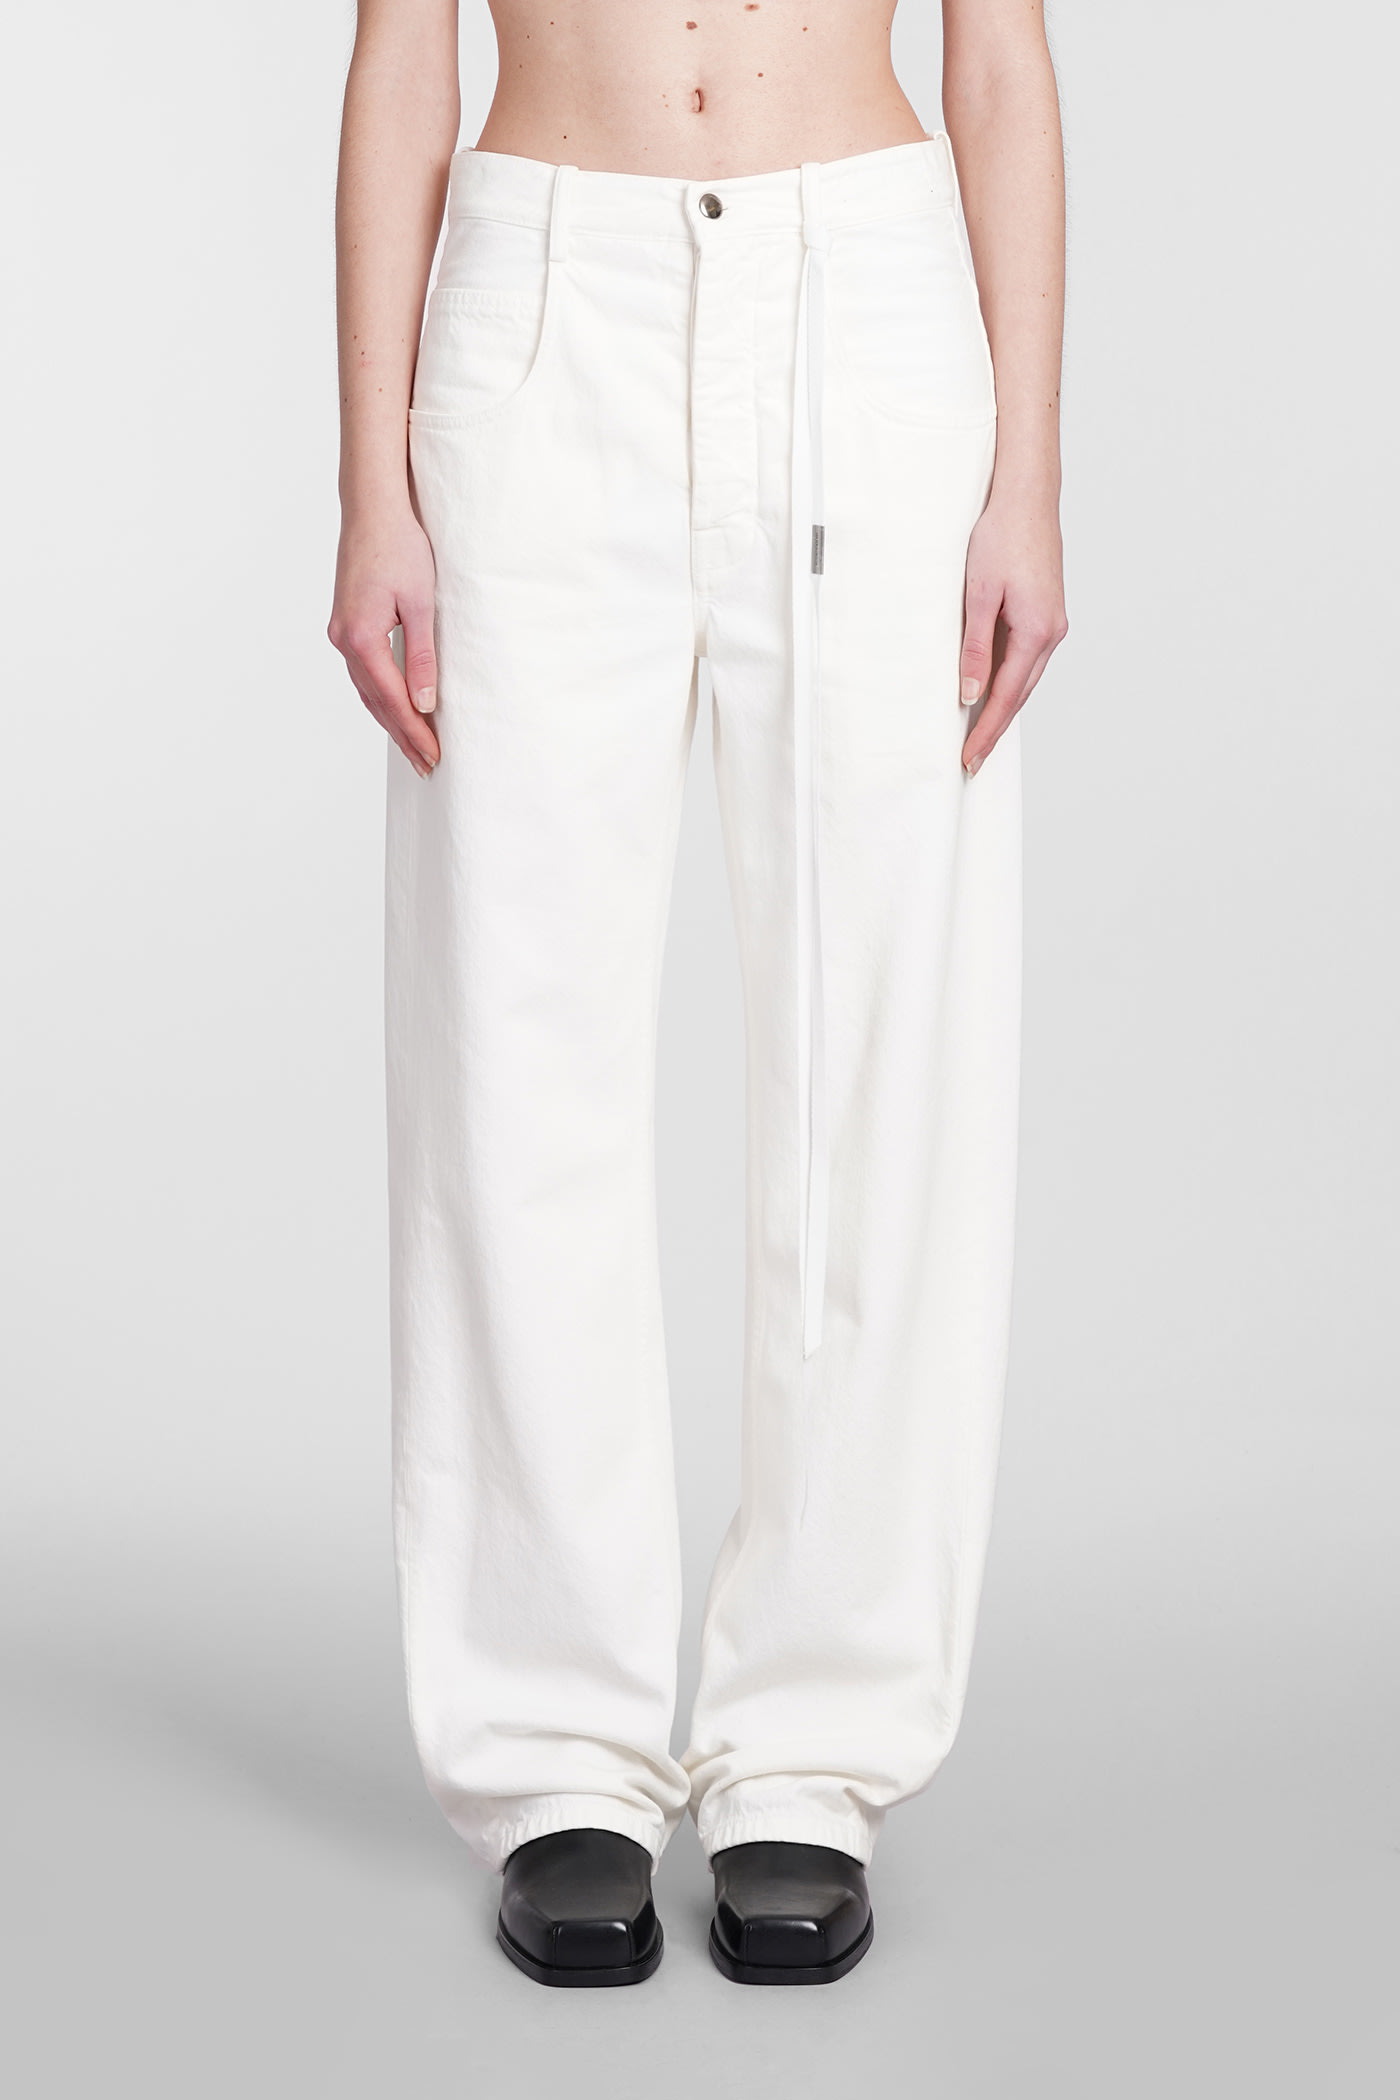 Ann Demeulemeester Jeans In White Cotton